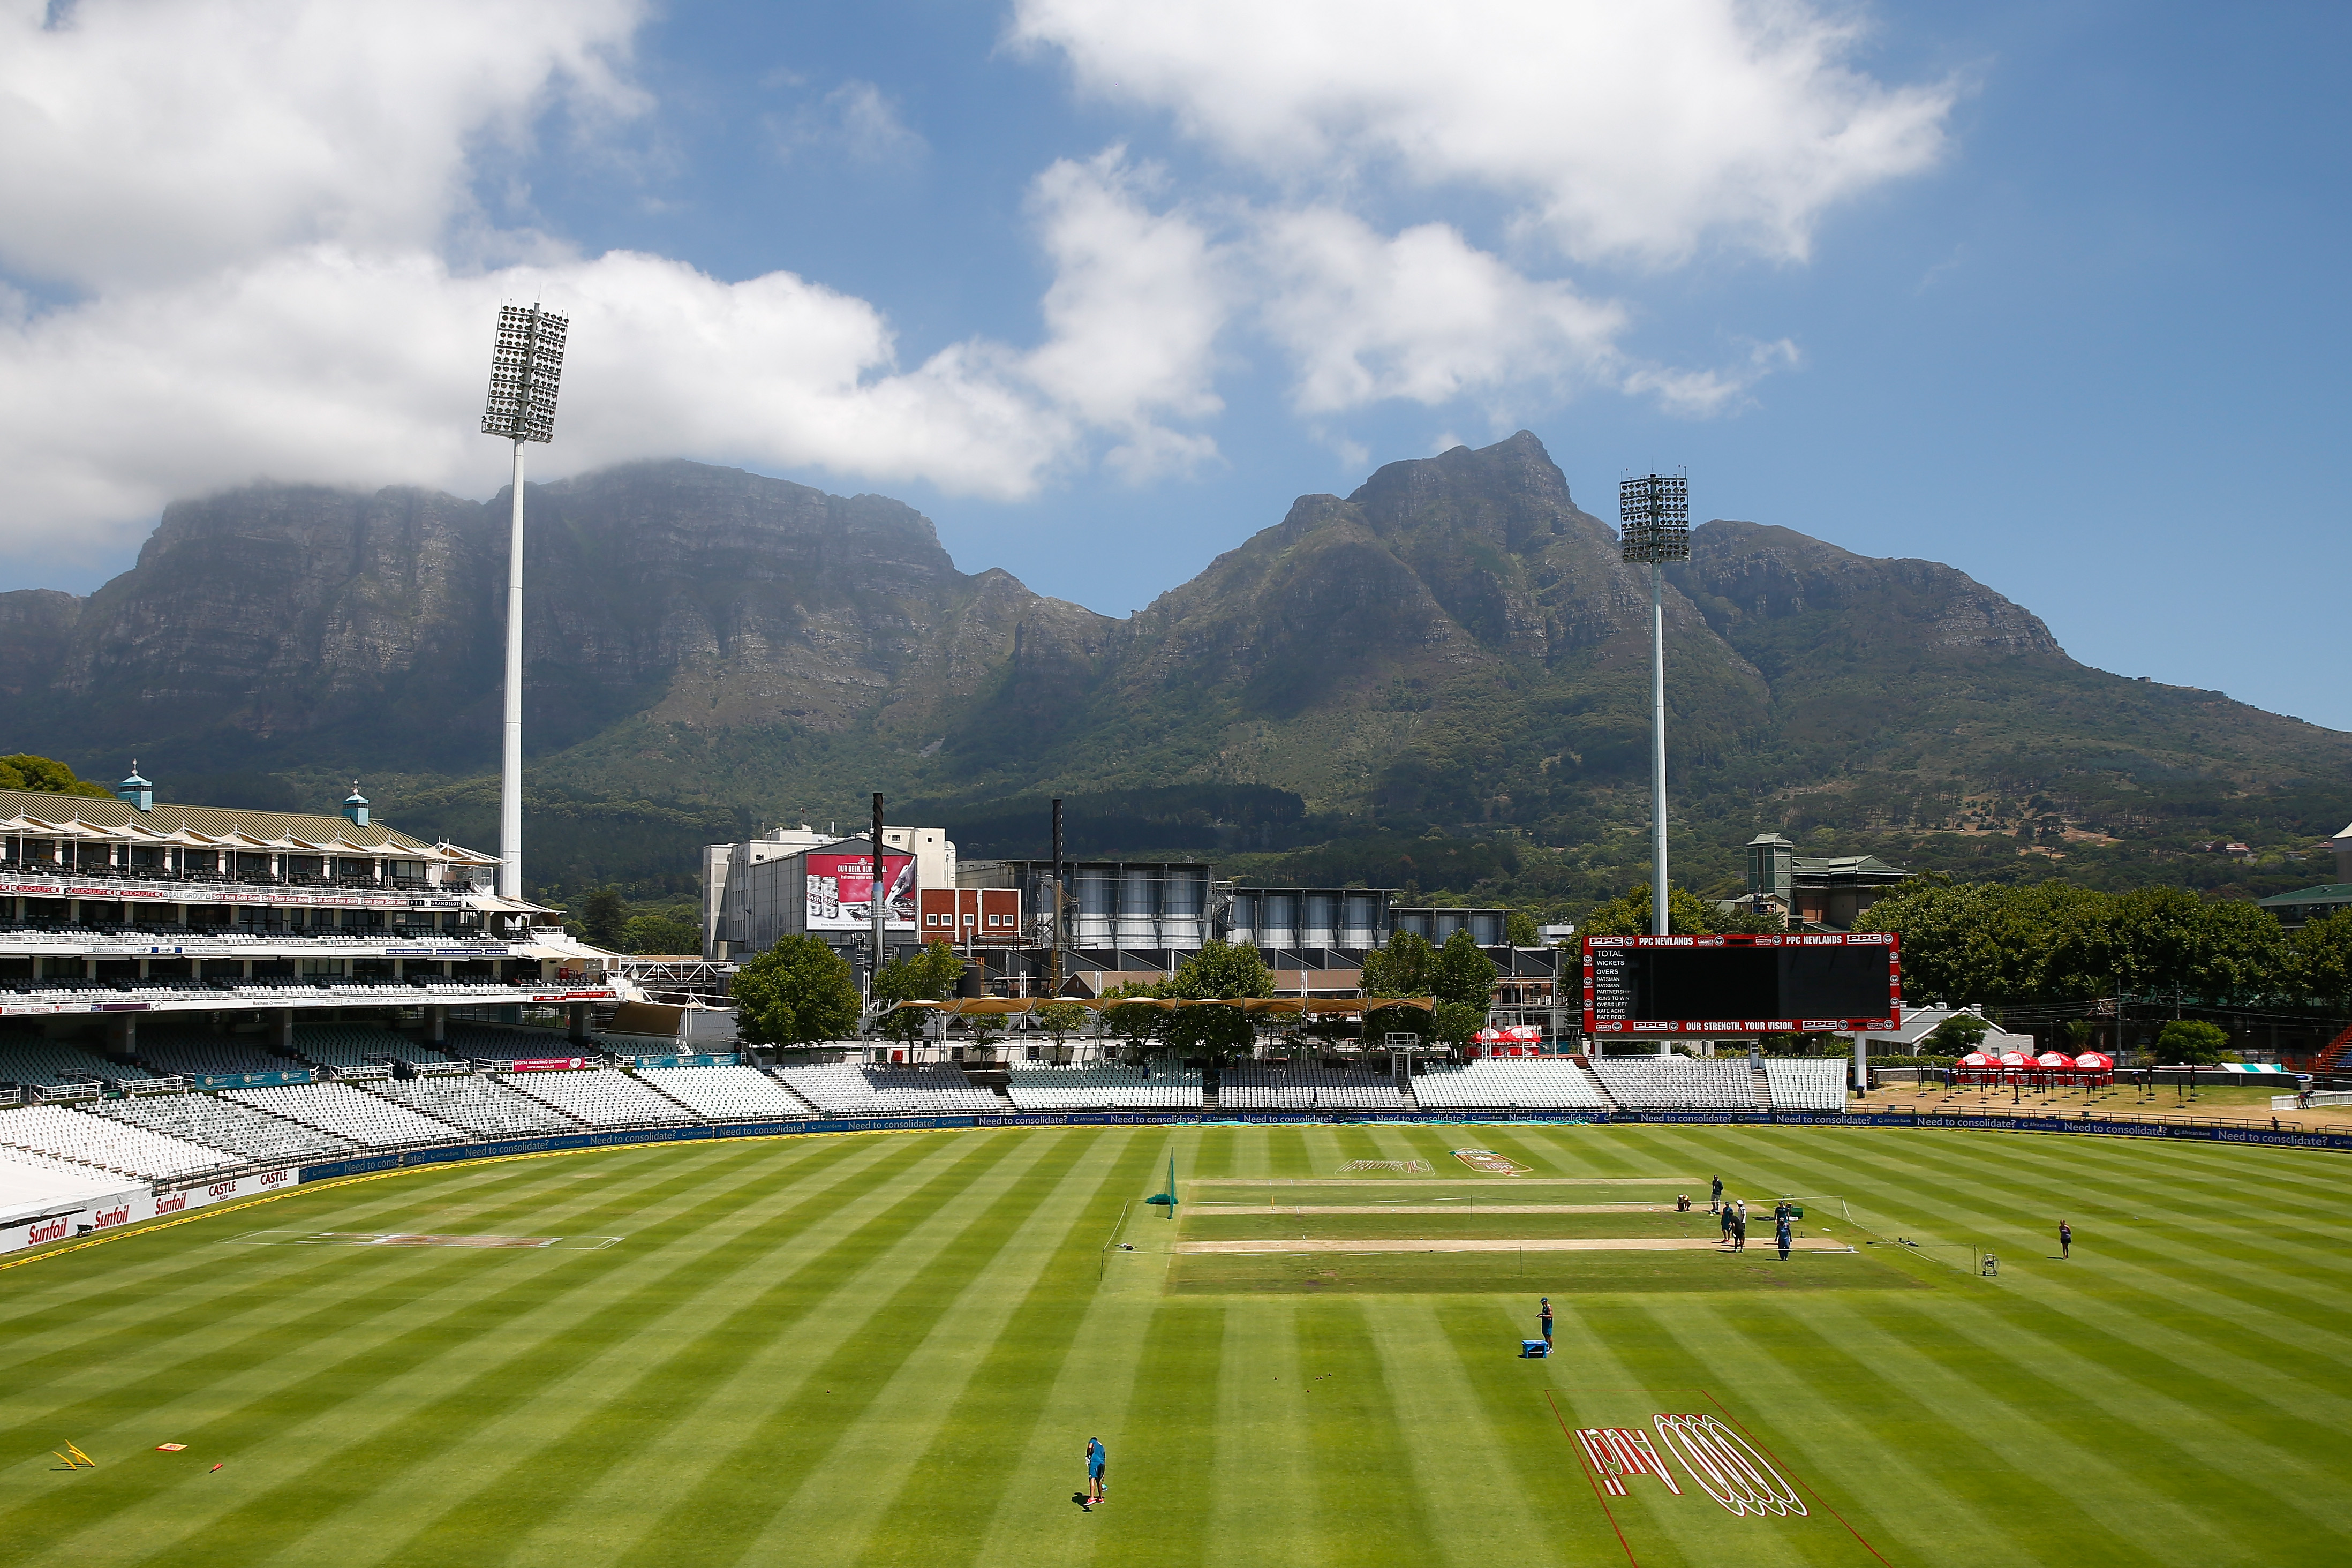 Western Province’s administrative disruption might see Newlands losing New Year's Test